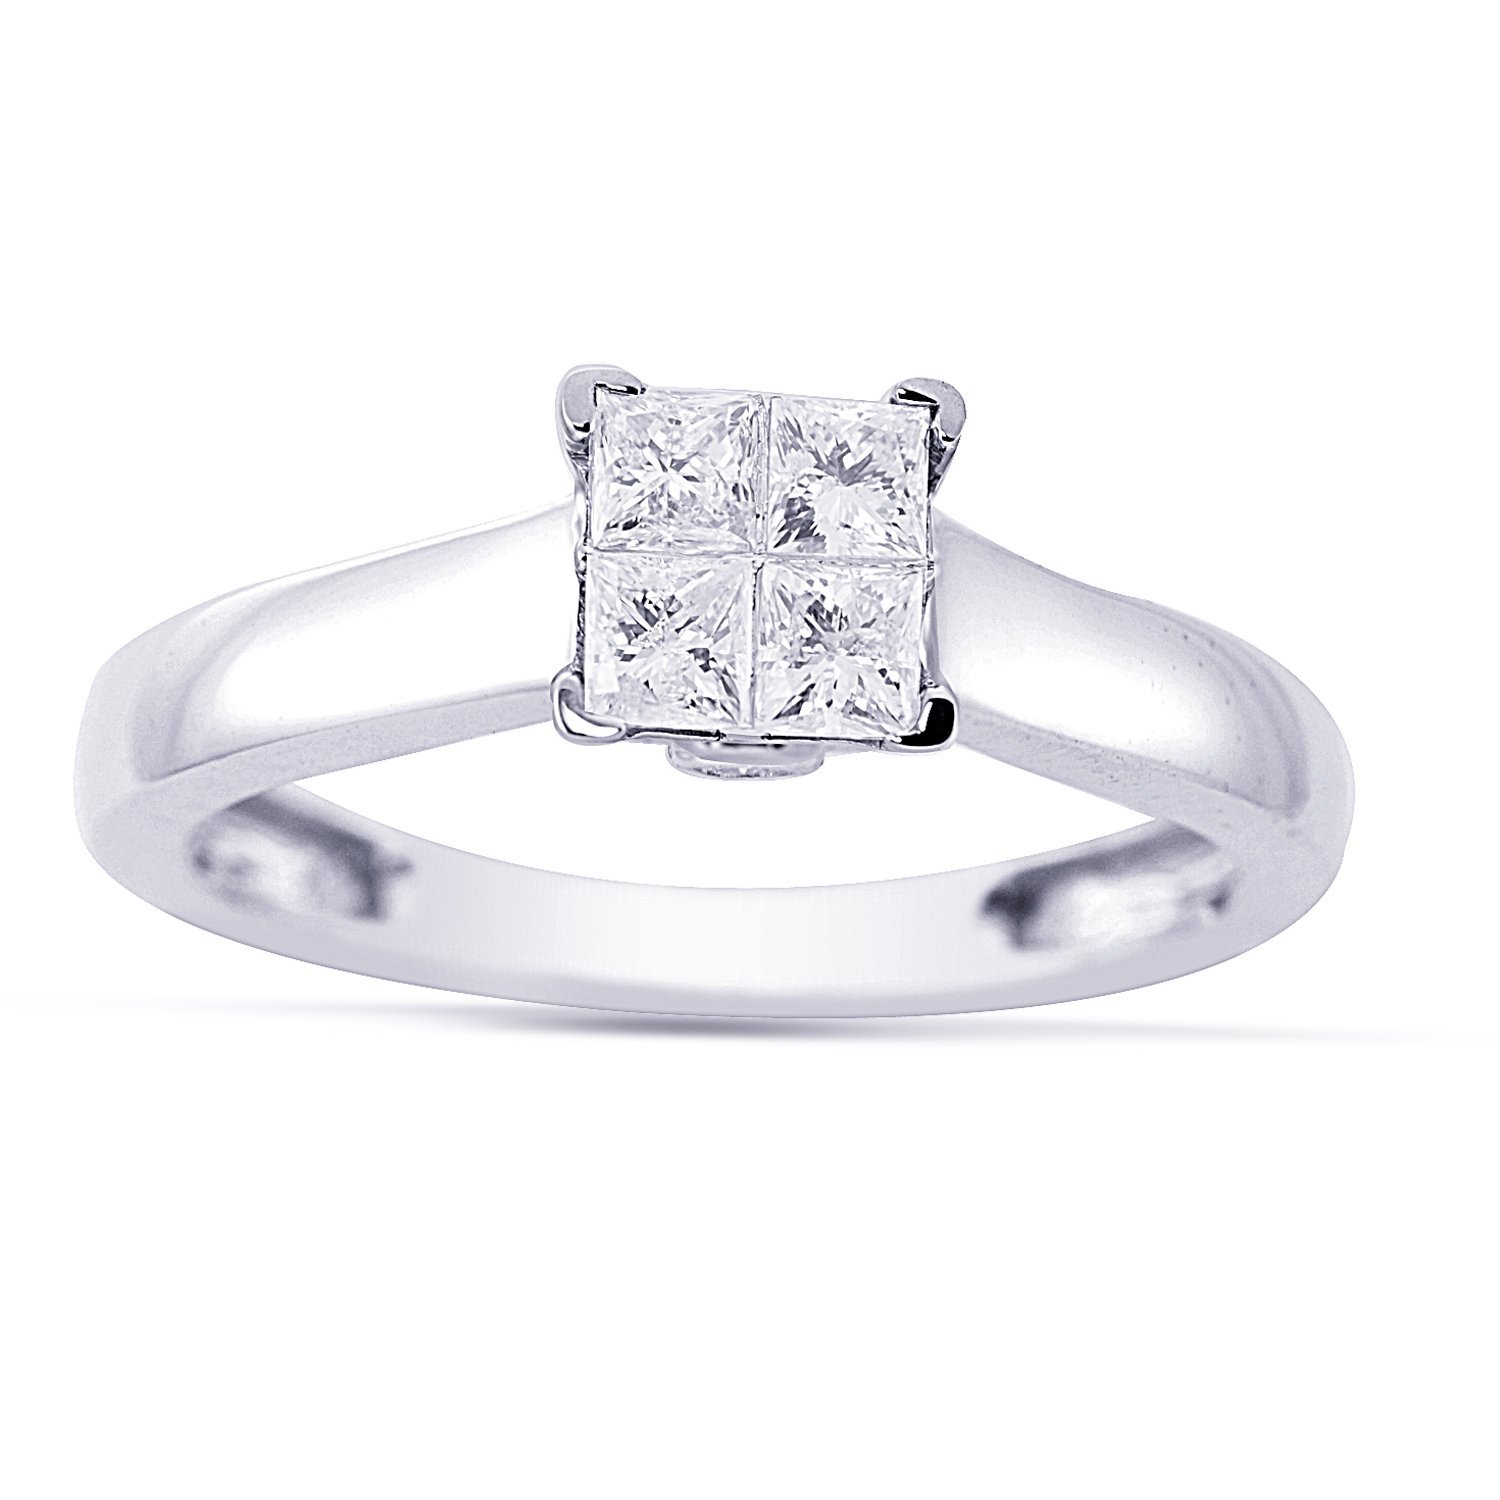 Women's 14k White Gold Engagement Ring (1/2 cttw I-J Color, I1-I2 Clarity), Size 7 $507.13